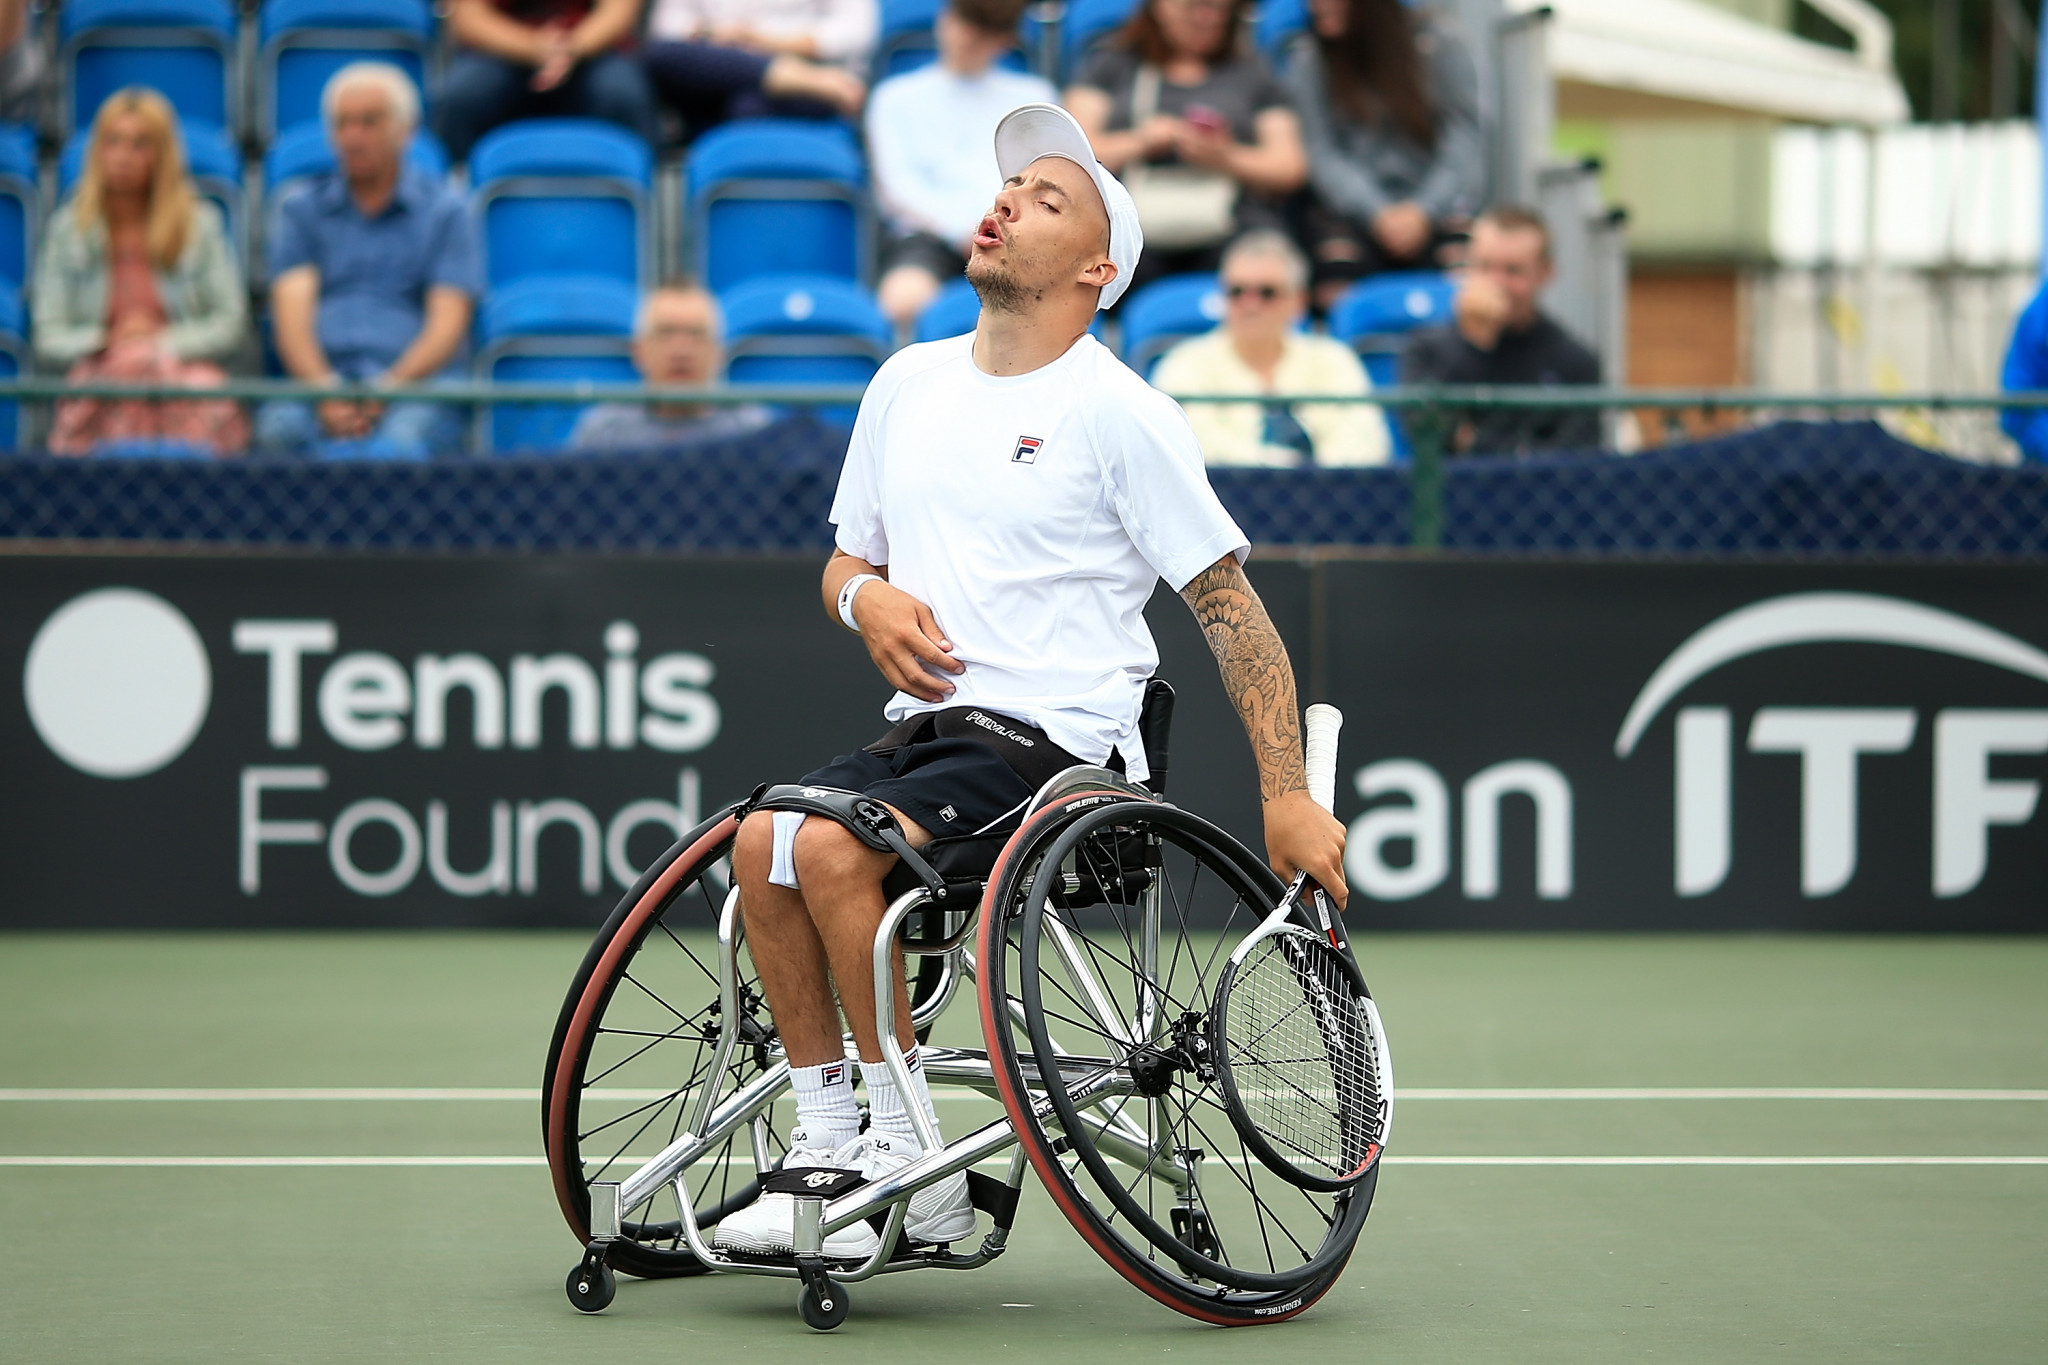 Britain's Andy Lapthorne has lost to 44-year-old David Wagner in the men's quad final at the British Open Wheelchair Tennis Championships ©Getty Images